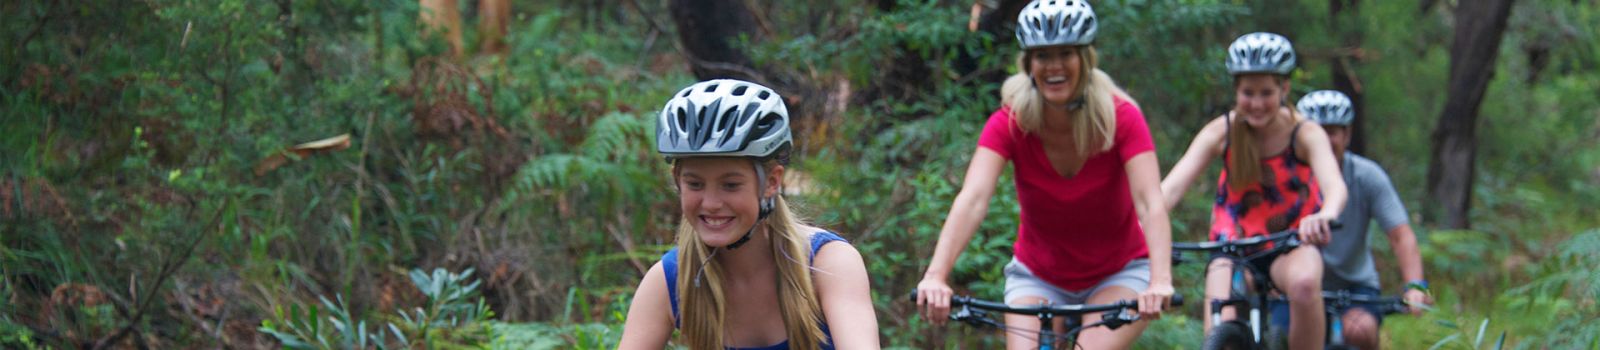 Image of girls cycling through a forest banner image